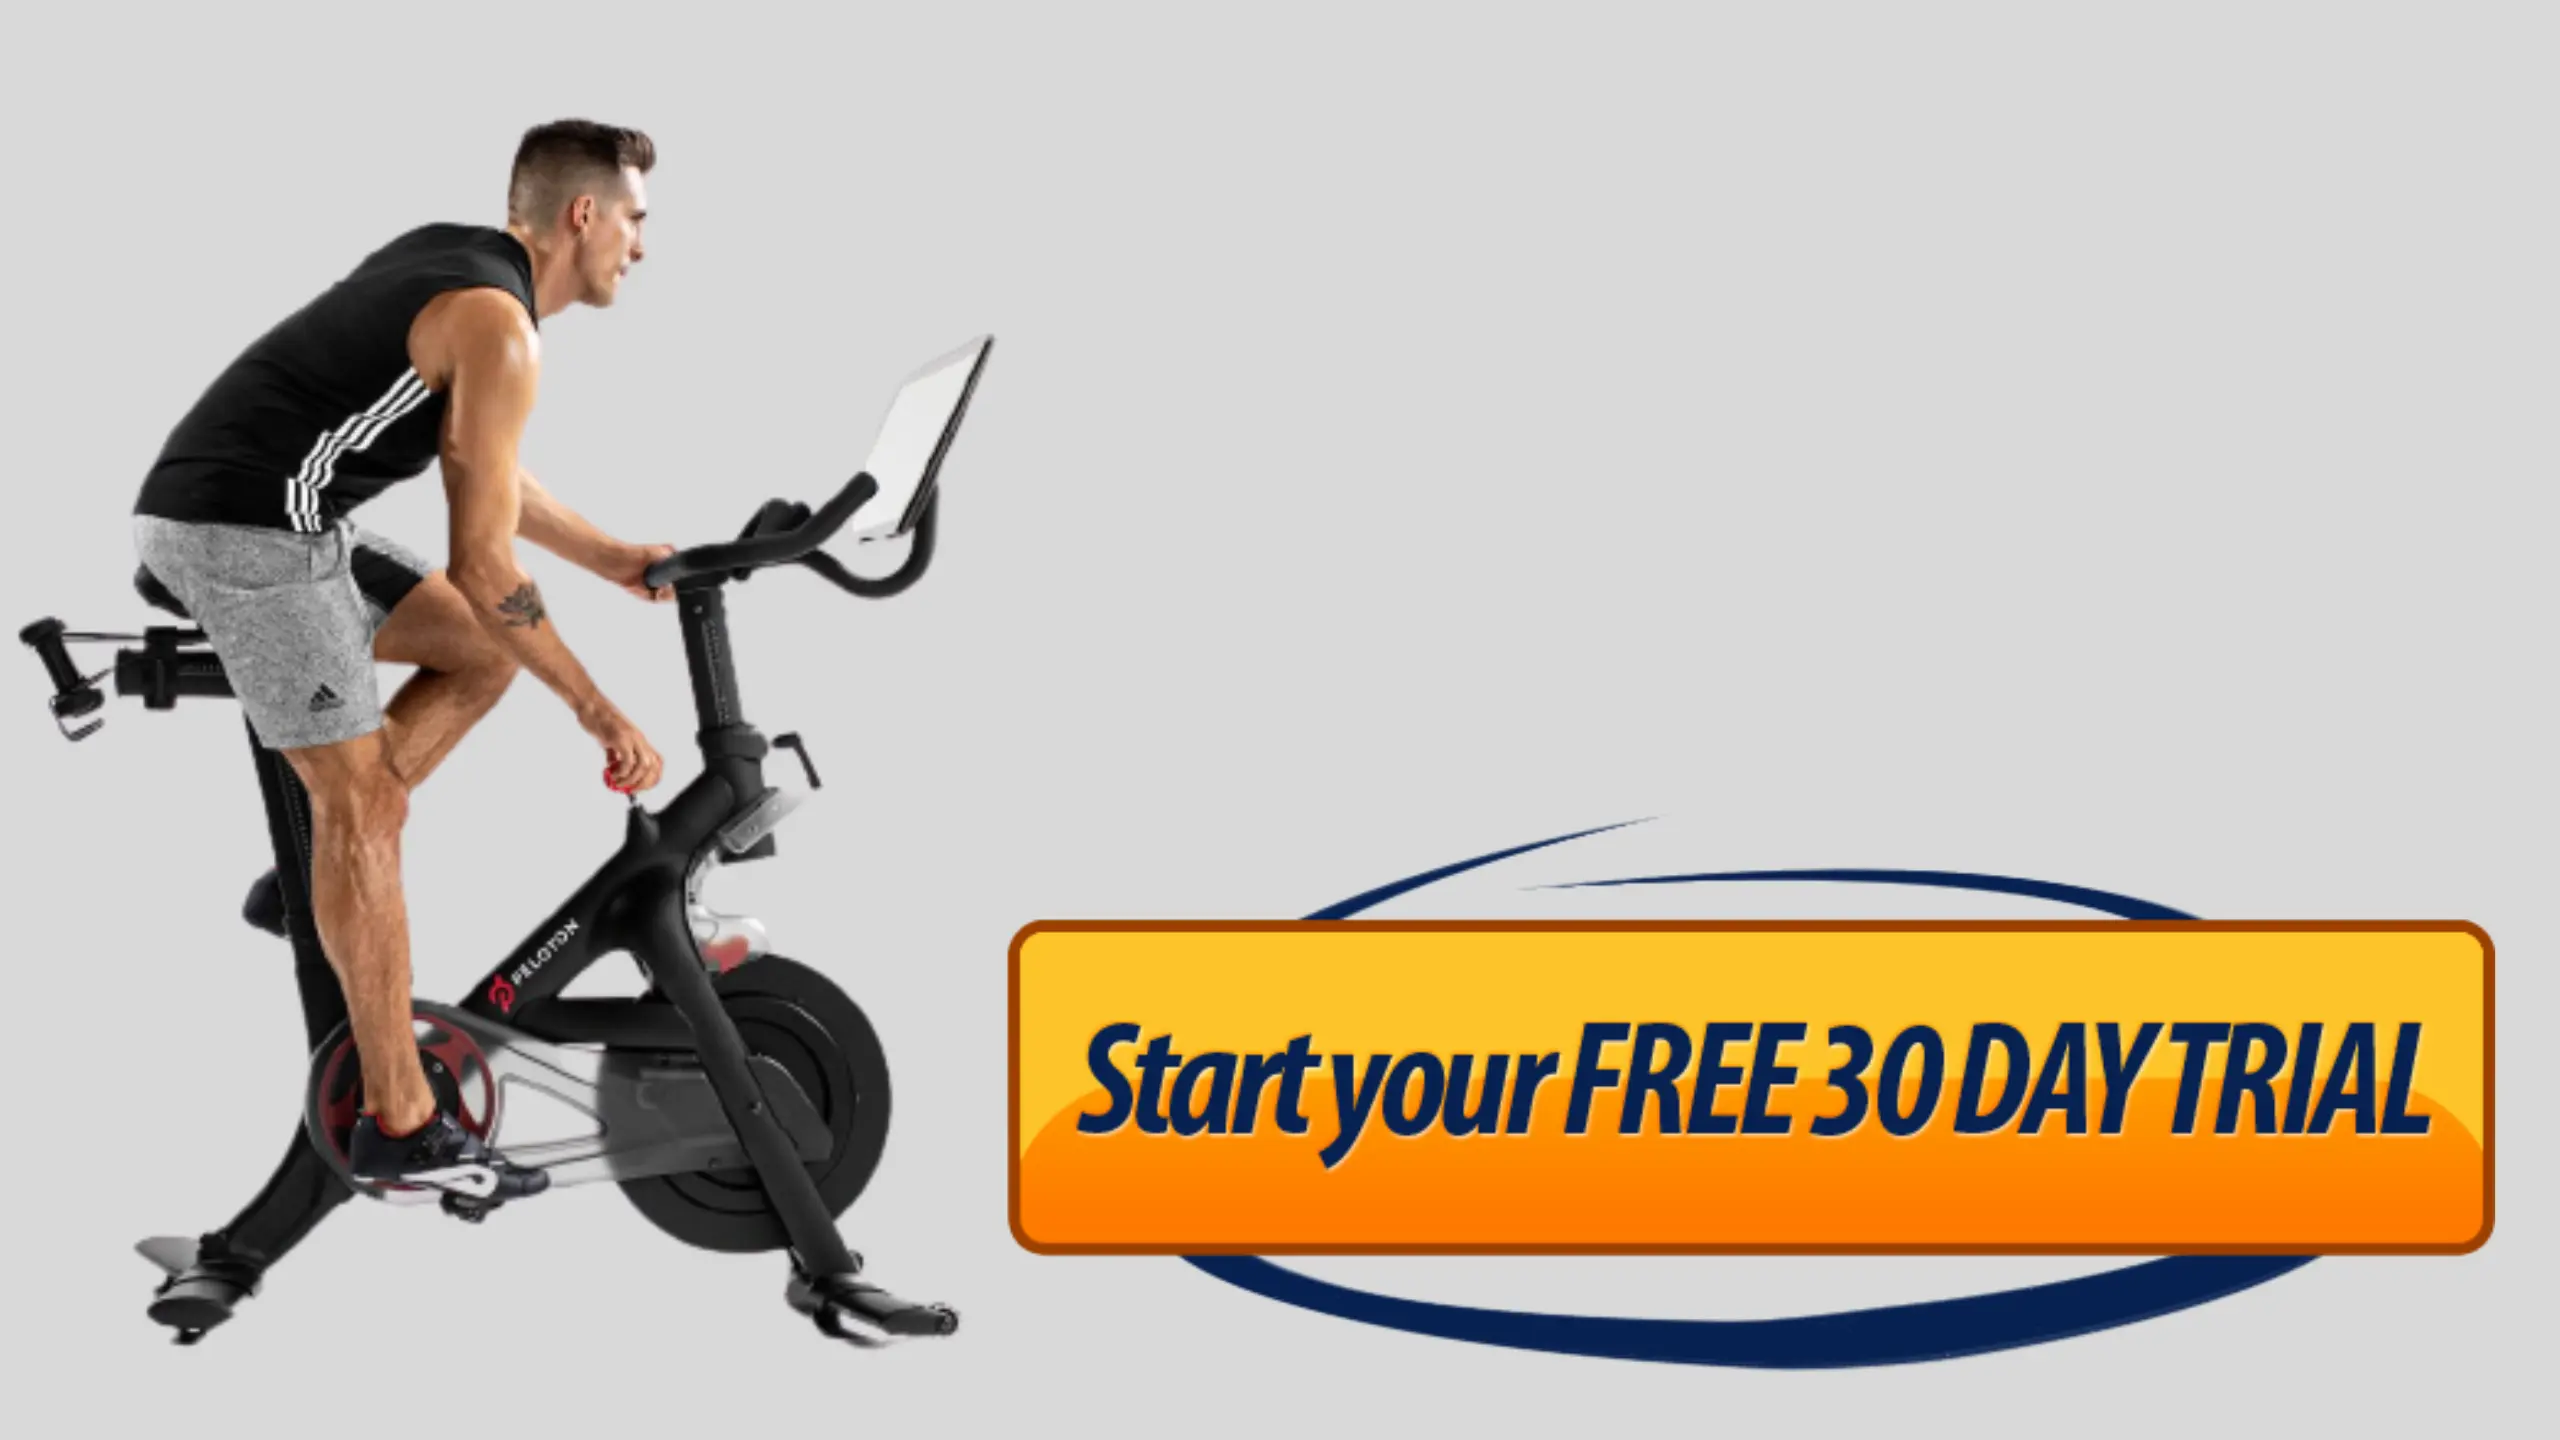 Does Peloton offer Free Trial Offer